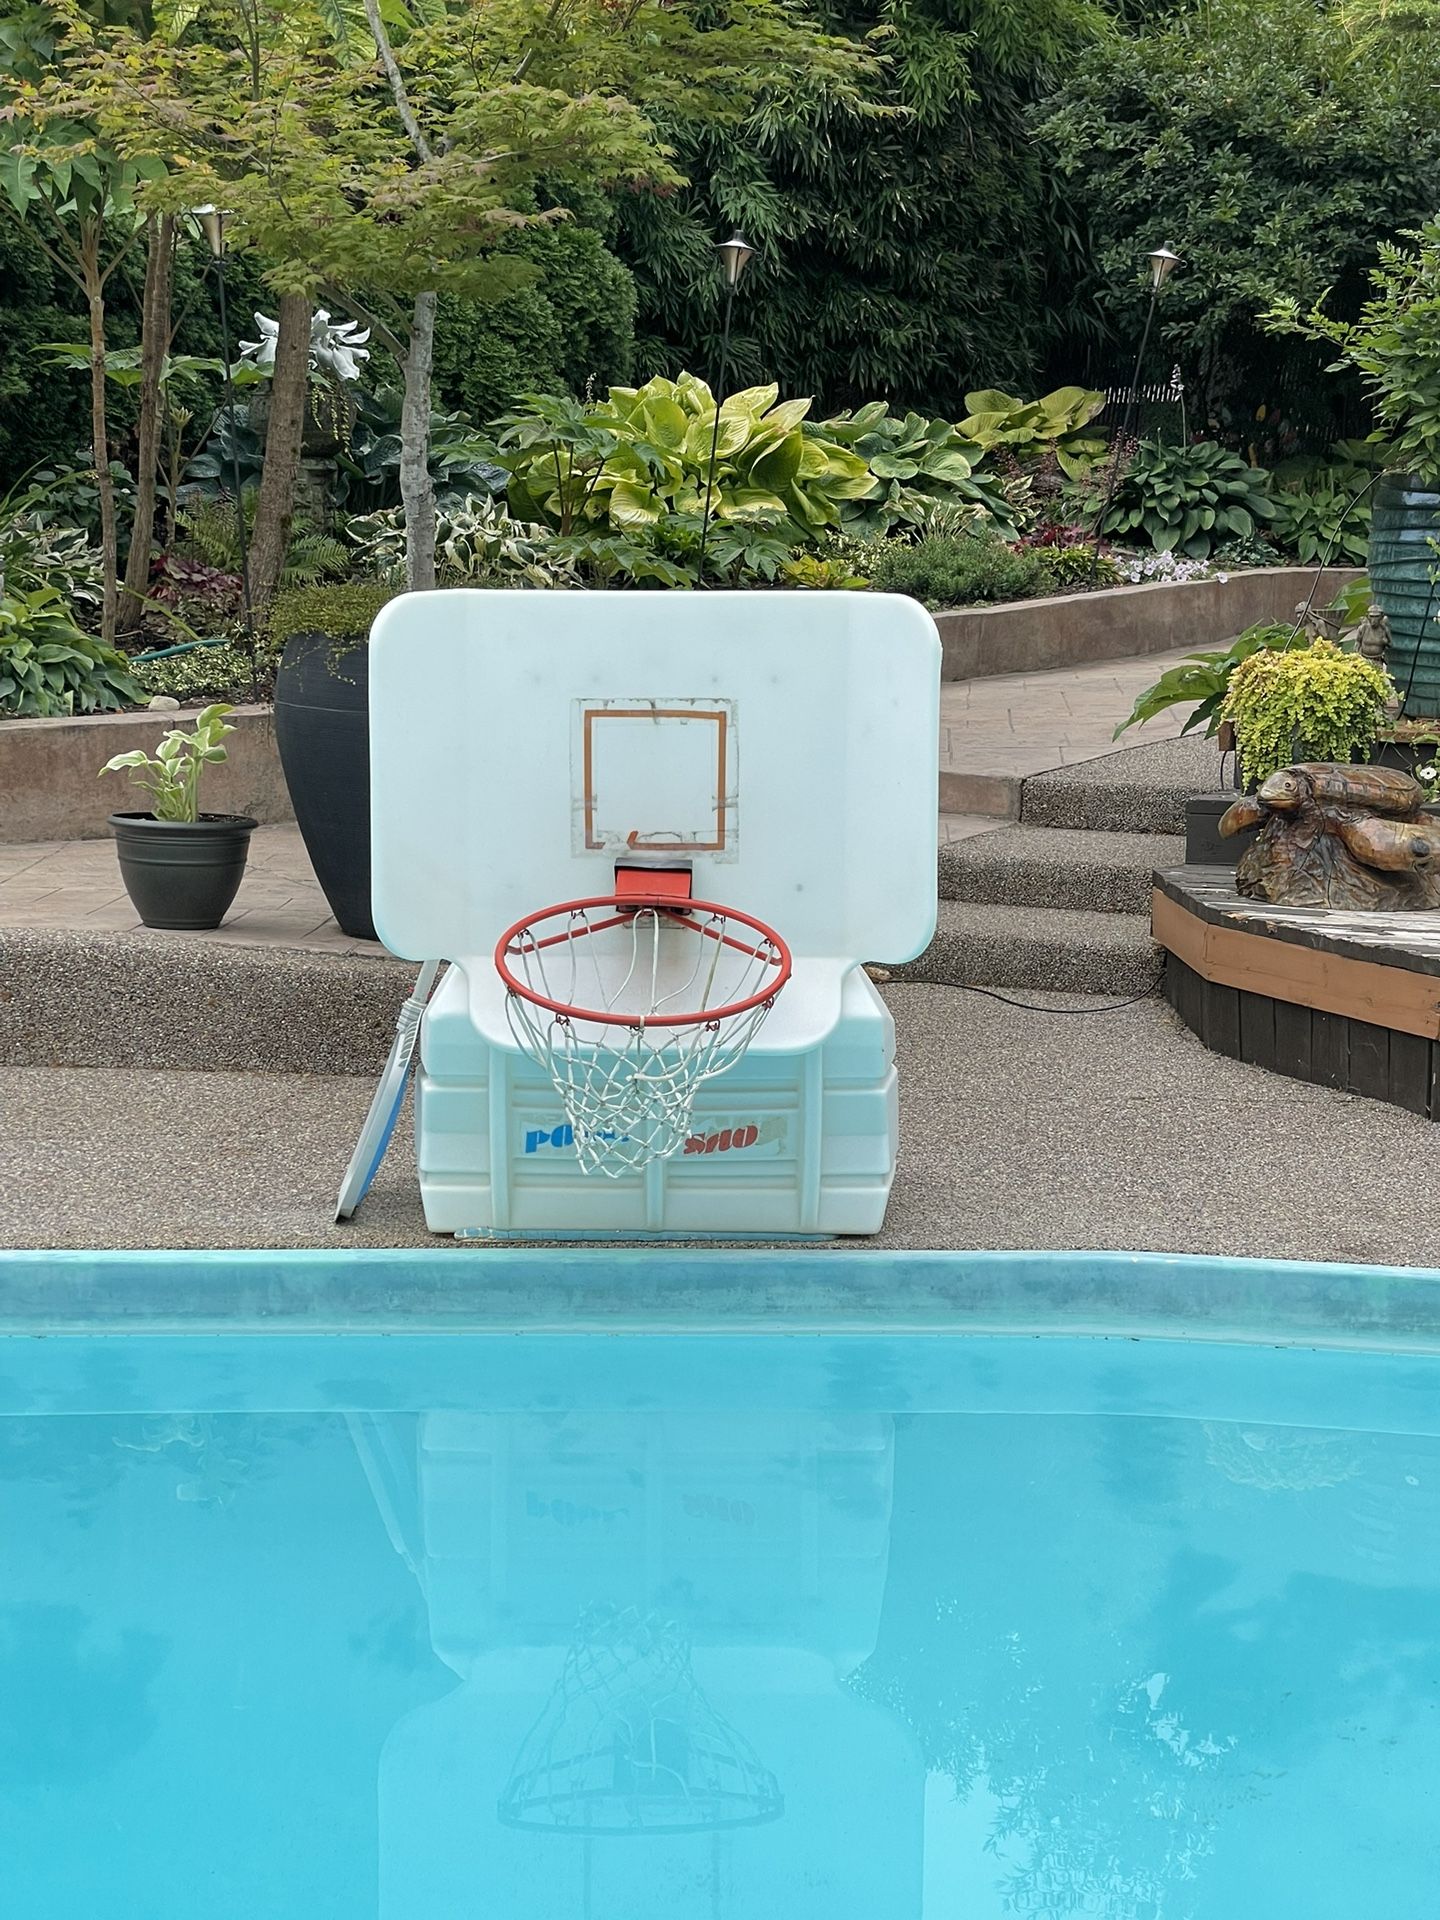 Basketball Hoop For In-ground Pool